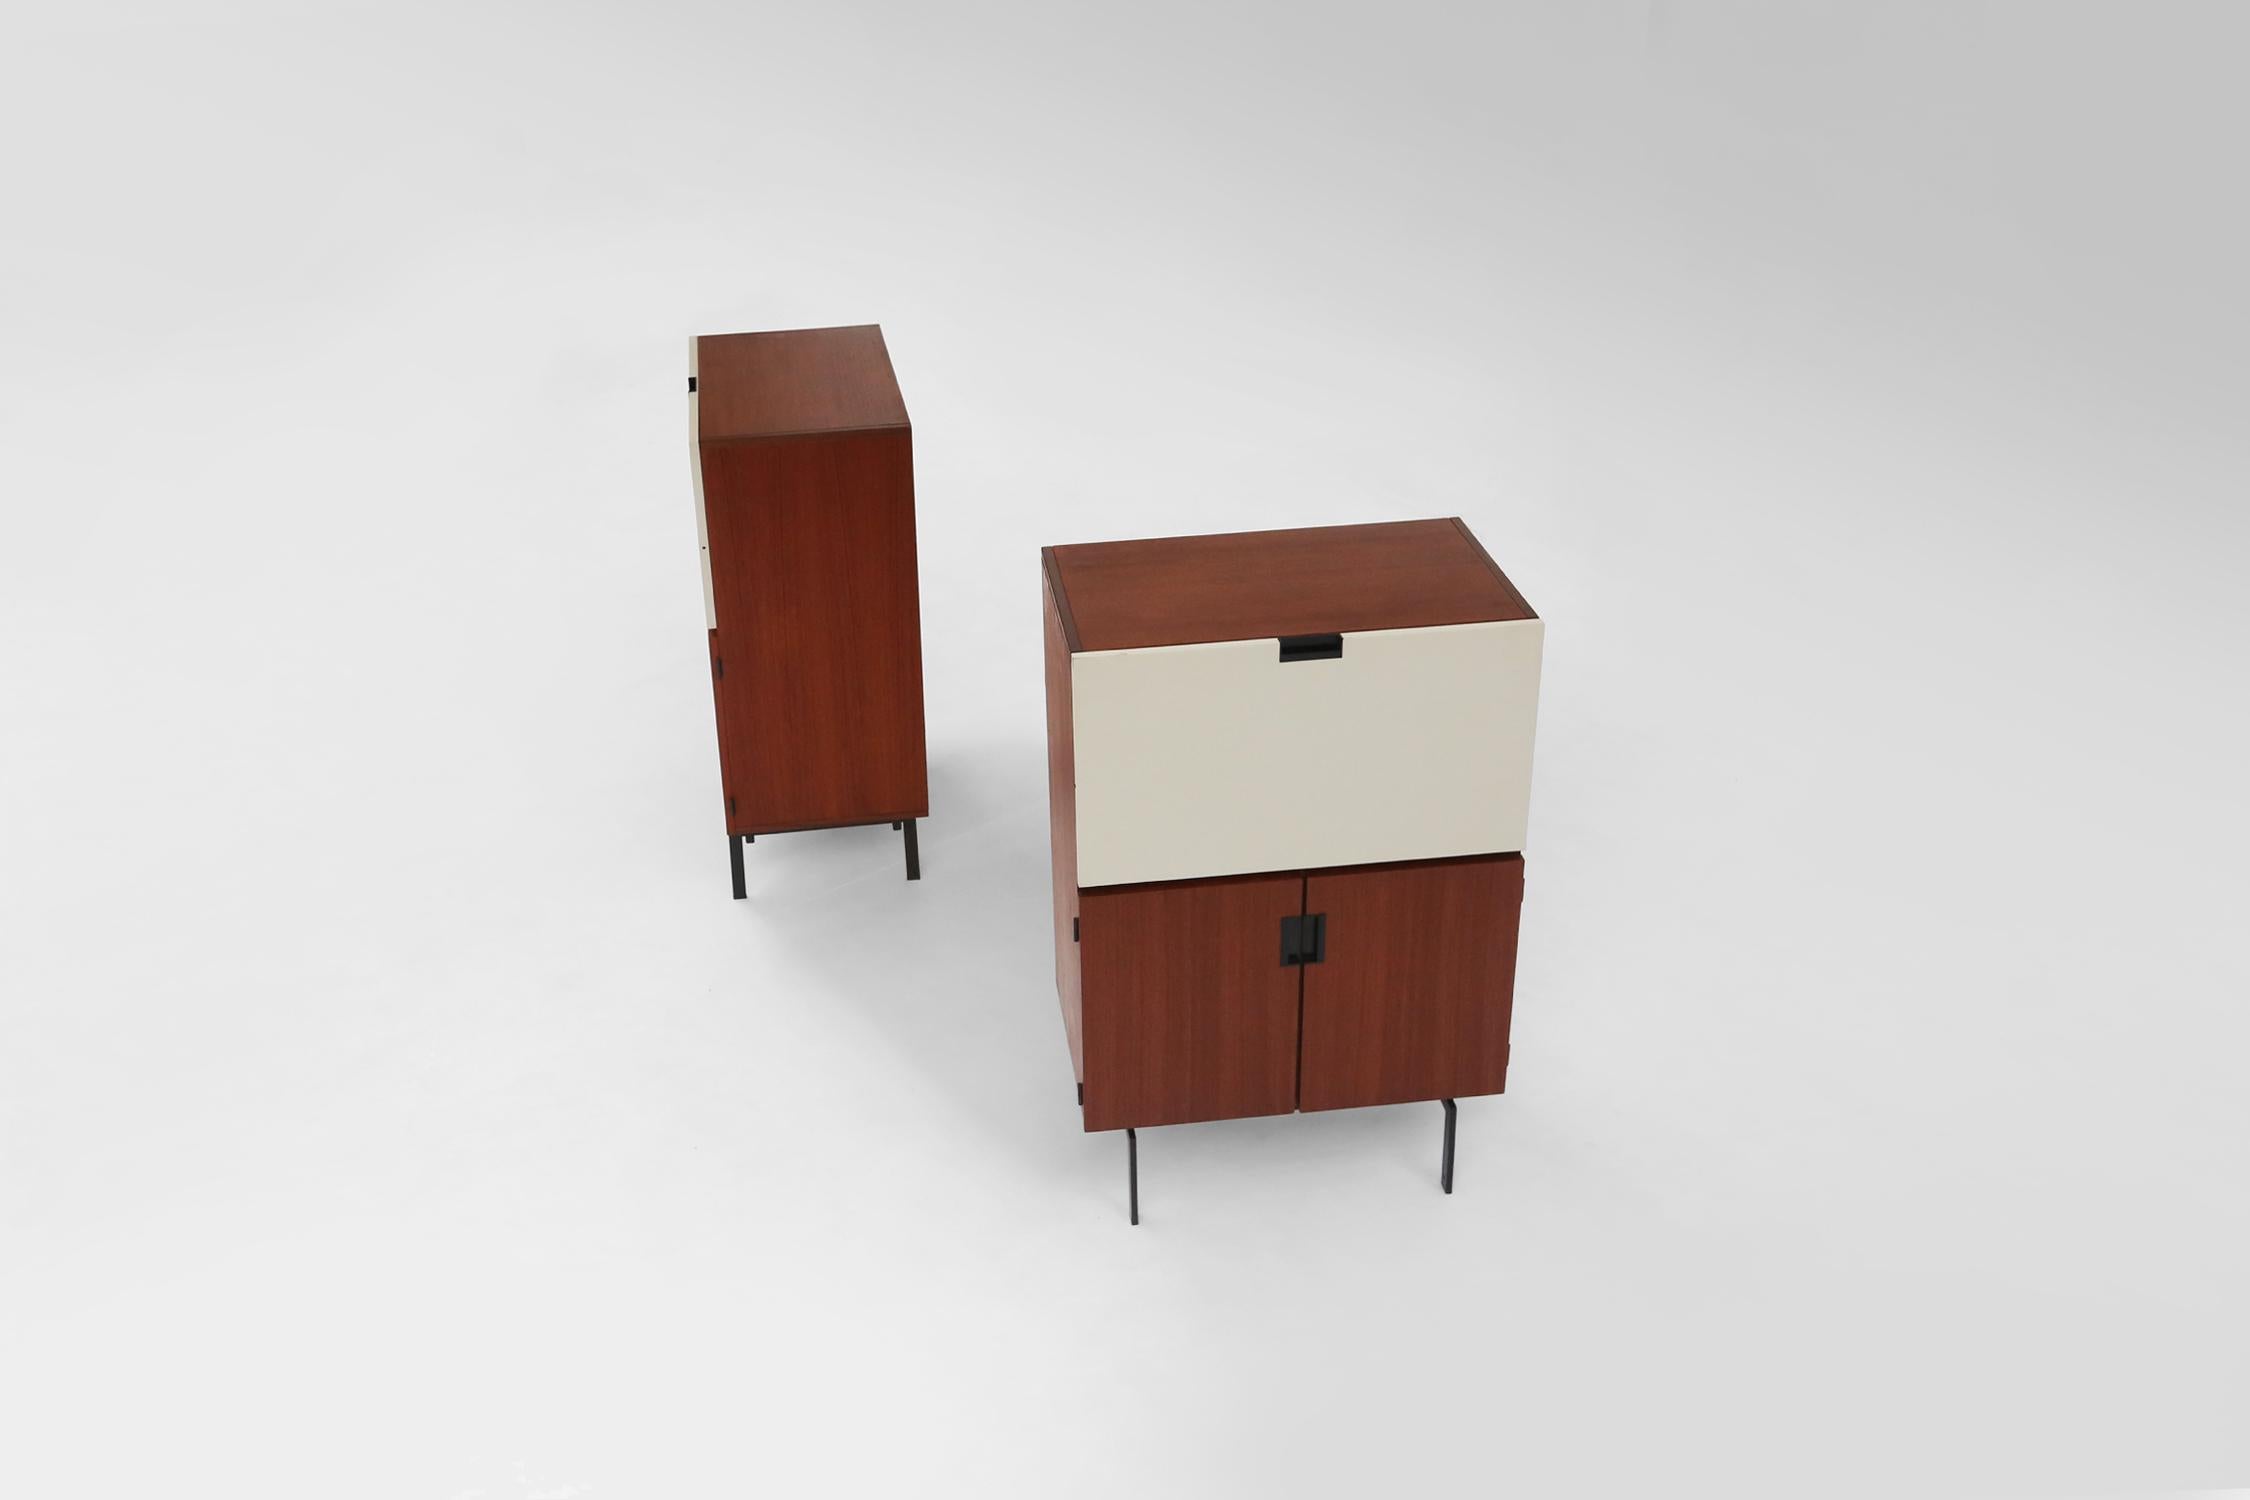 Set of two cabinets designed by the Dutch designer Cees Braakman in 1958 for Pastoe. This pair of the Japanese series is made of teak wood , a black metal base and a white door that can serve as a writing table.